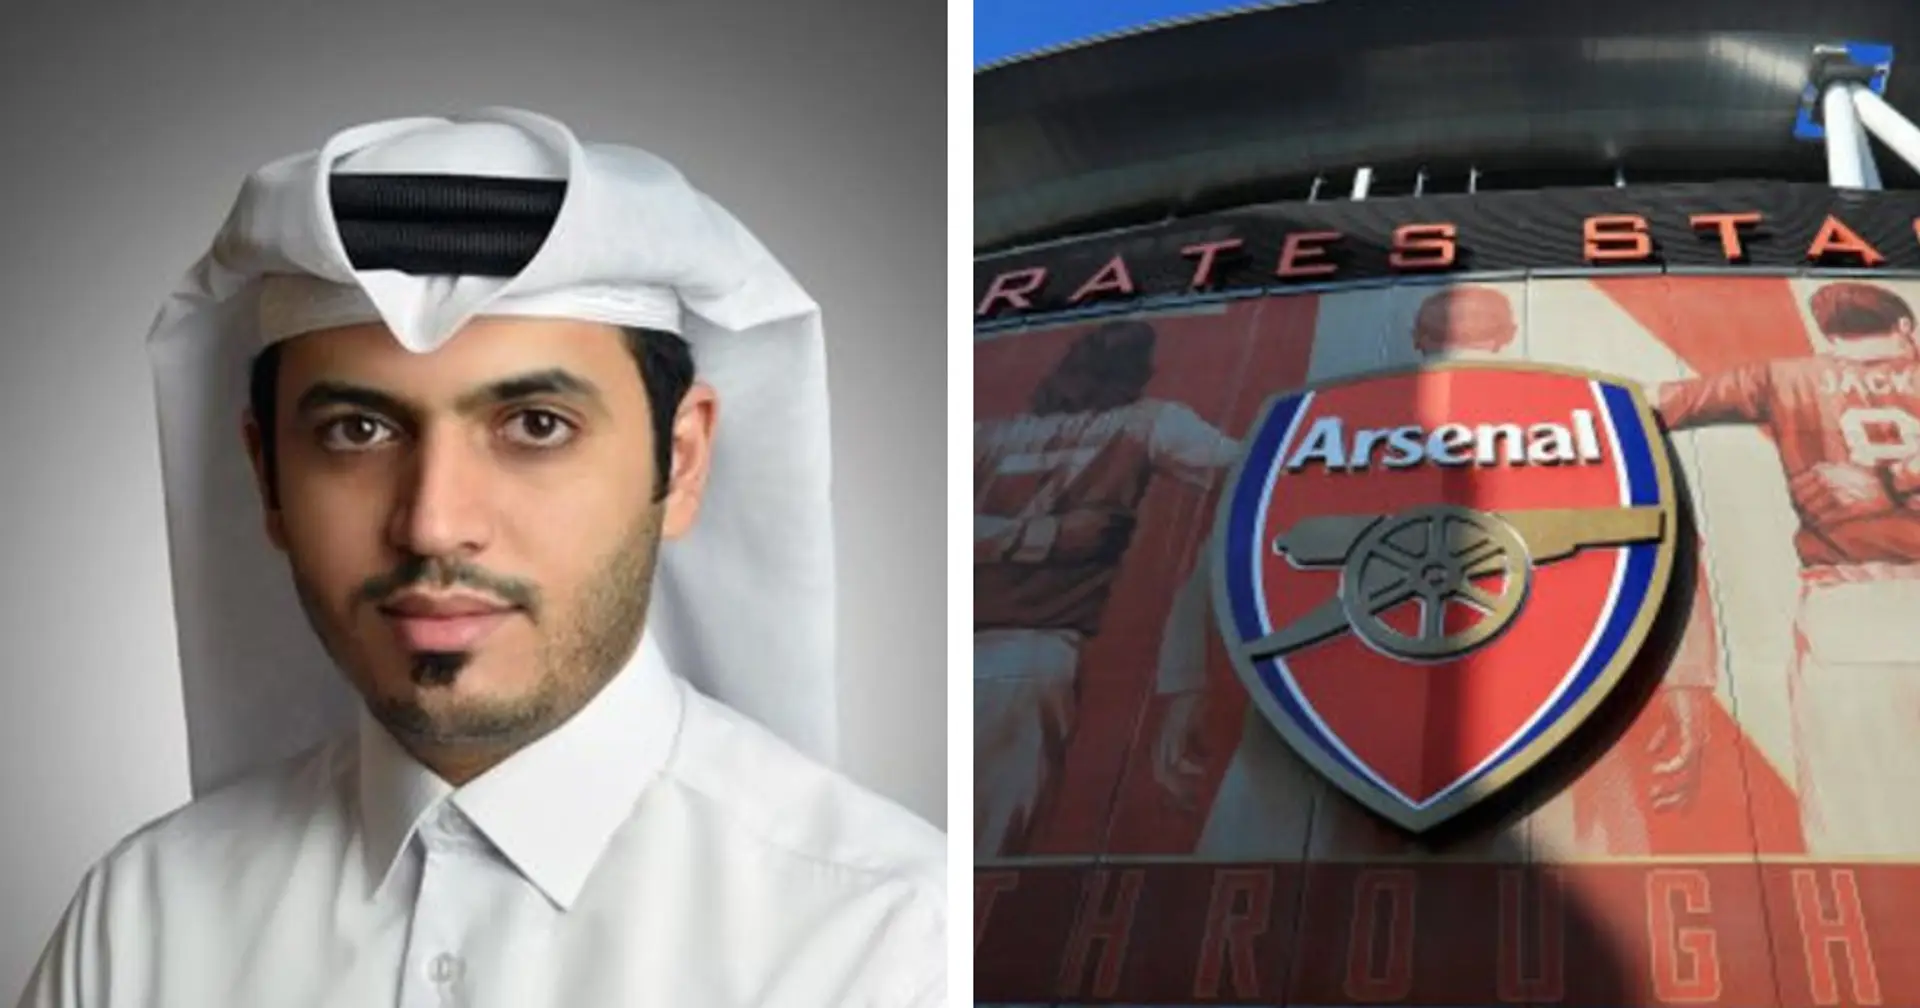 Qatari businessman related to PSG family interested in buying Arsenal